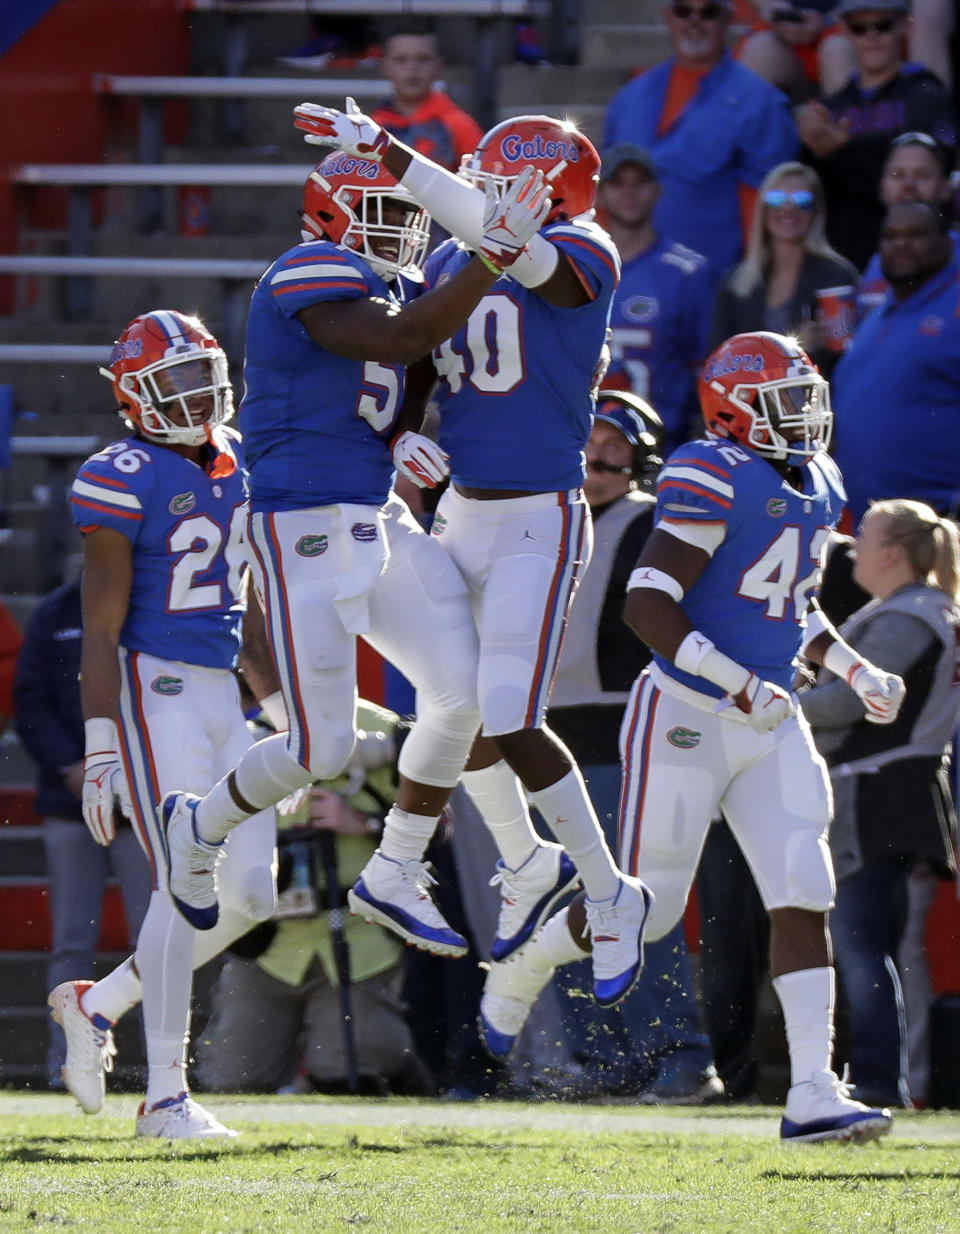 Florida linebacker Ventrell Miller, center left, celebrates after returning an 82-yard interception for a touchdown against Idaho with linebacker Nick Smith (40) during the second half of an NCAA college football game, Saturday, Nov. 17, 2018, in Gainesville, Fla. (AP Photo/John Raoux)